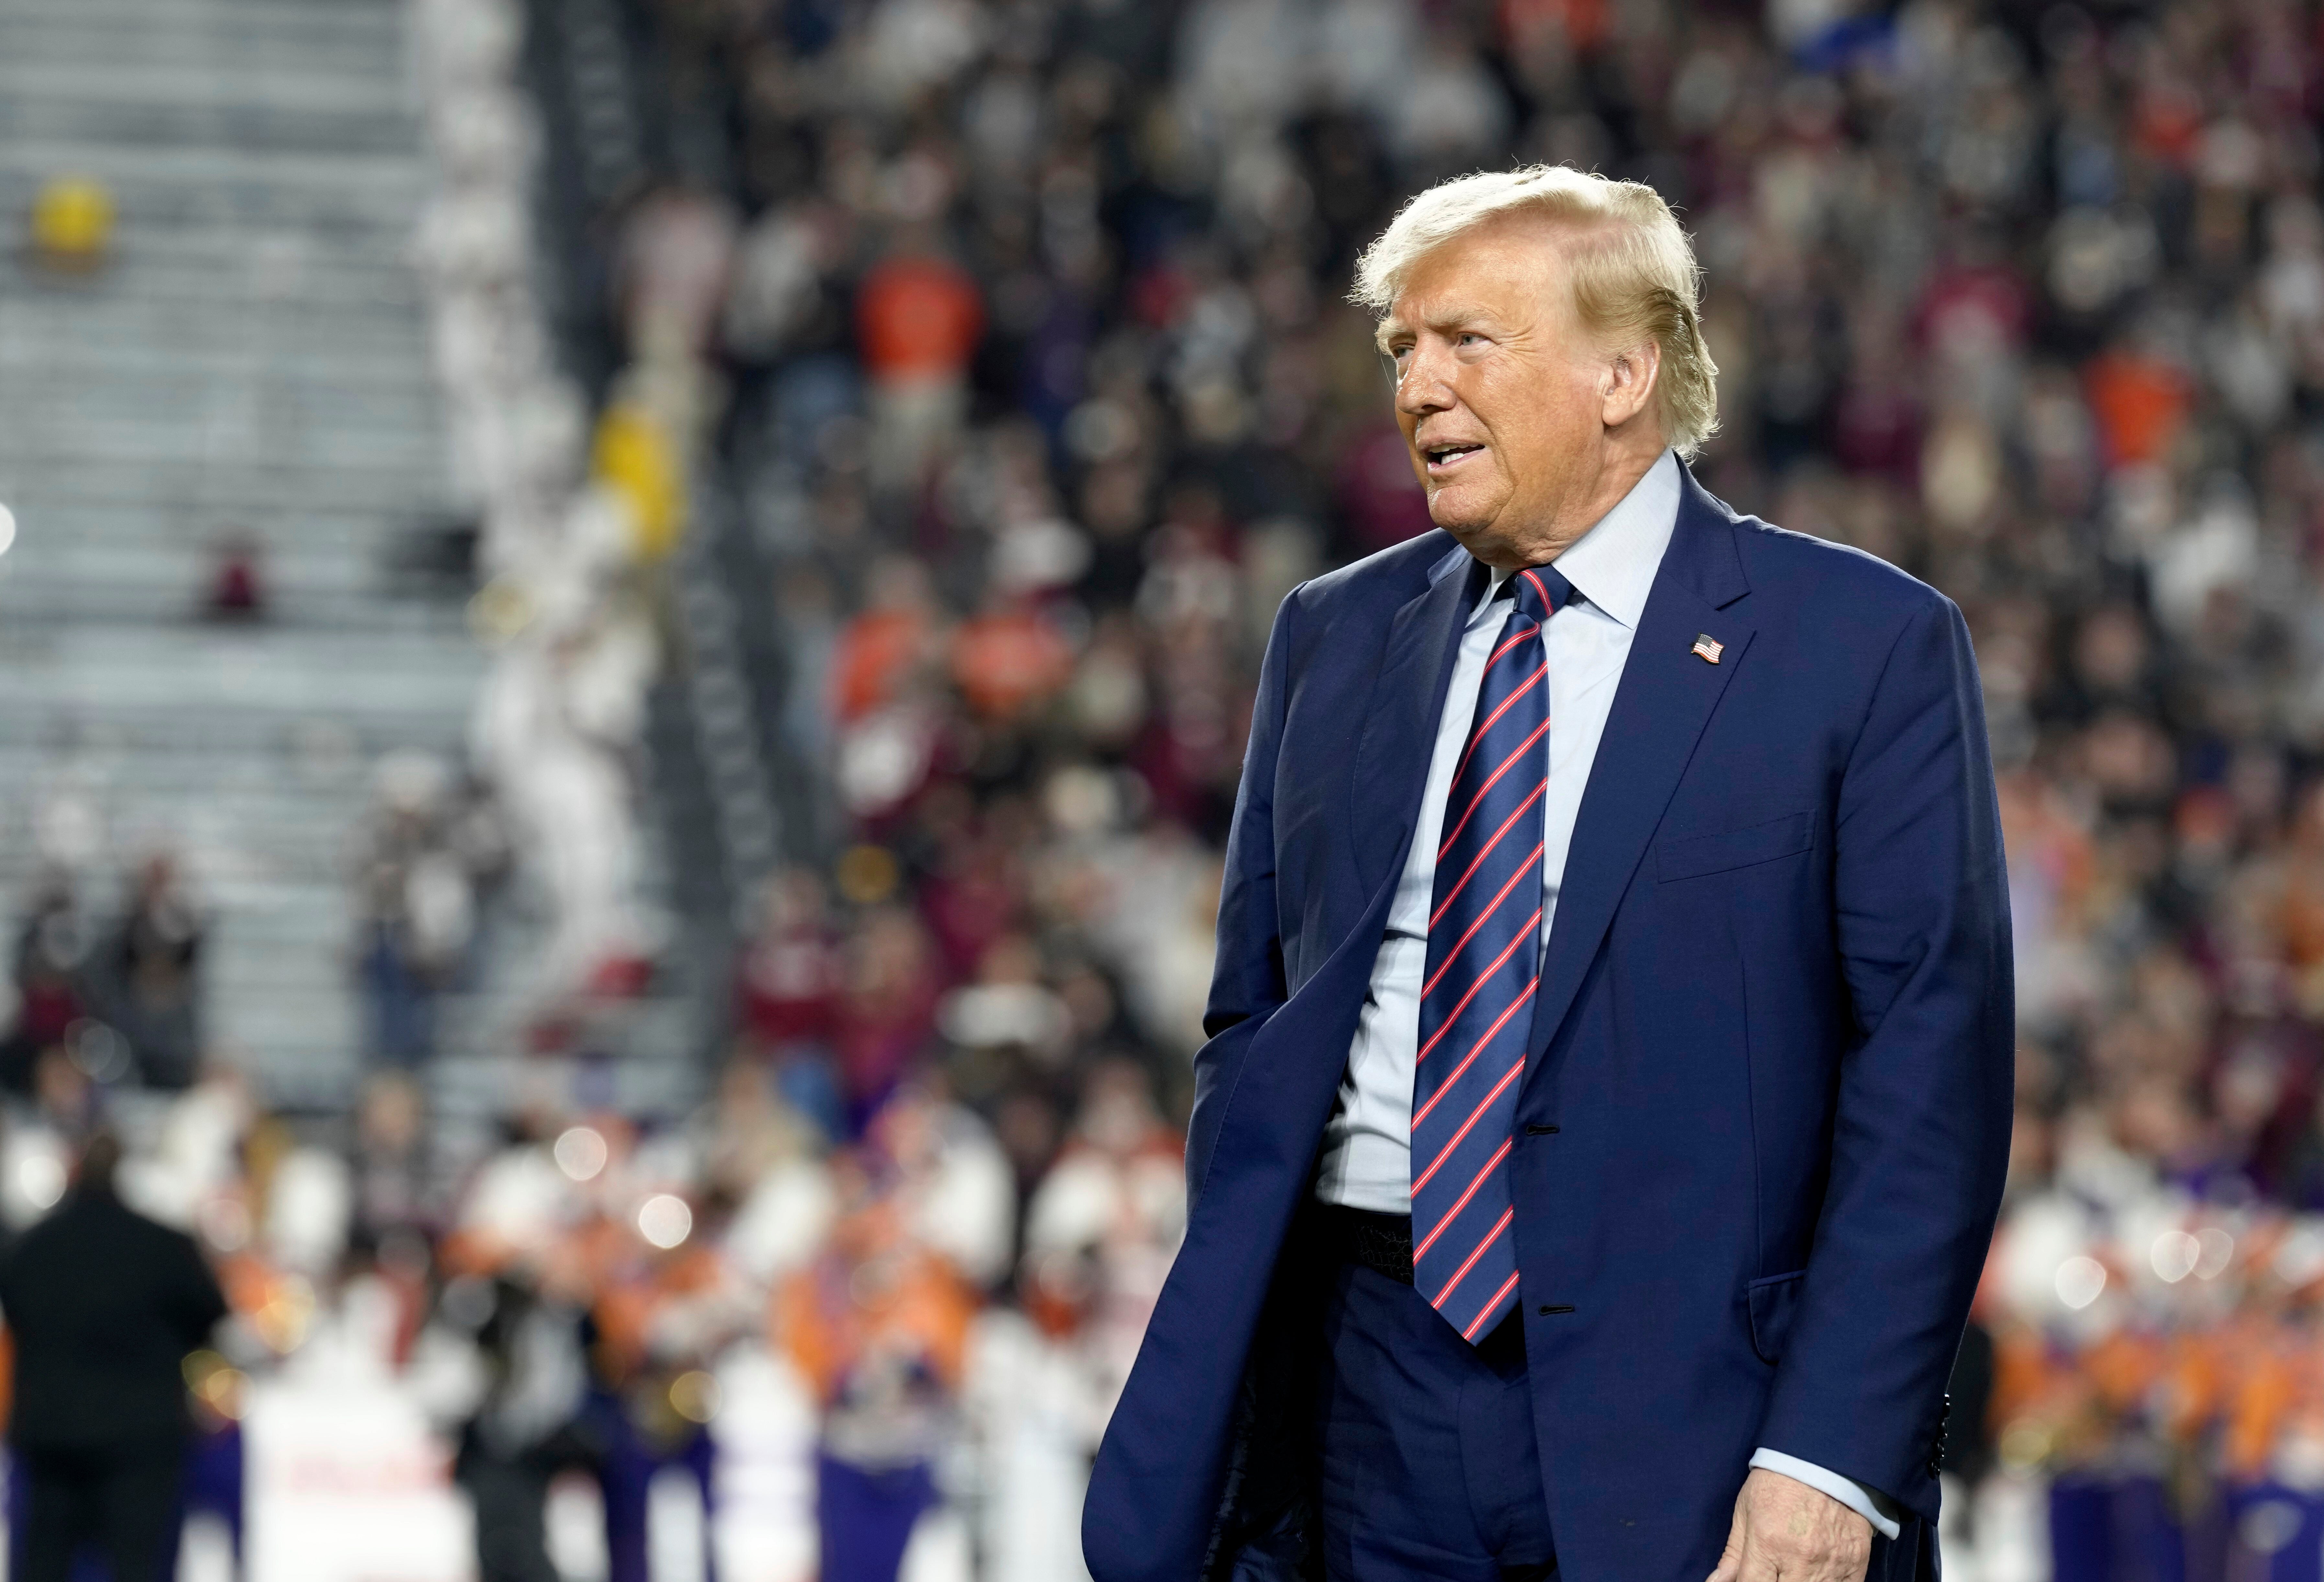 Republican presidential candidate and former President Donald Trump stands on the field during halftime in an NCAA college football game between the University of South Carolina and Clemson Saturday, 25 November 2023, in Columbia, South Carolina